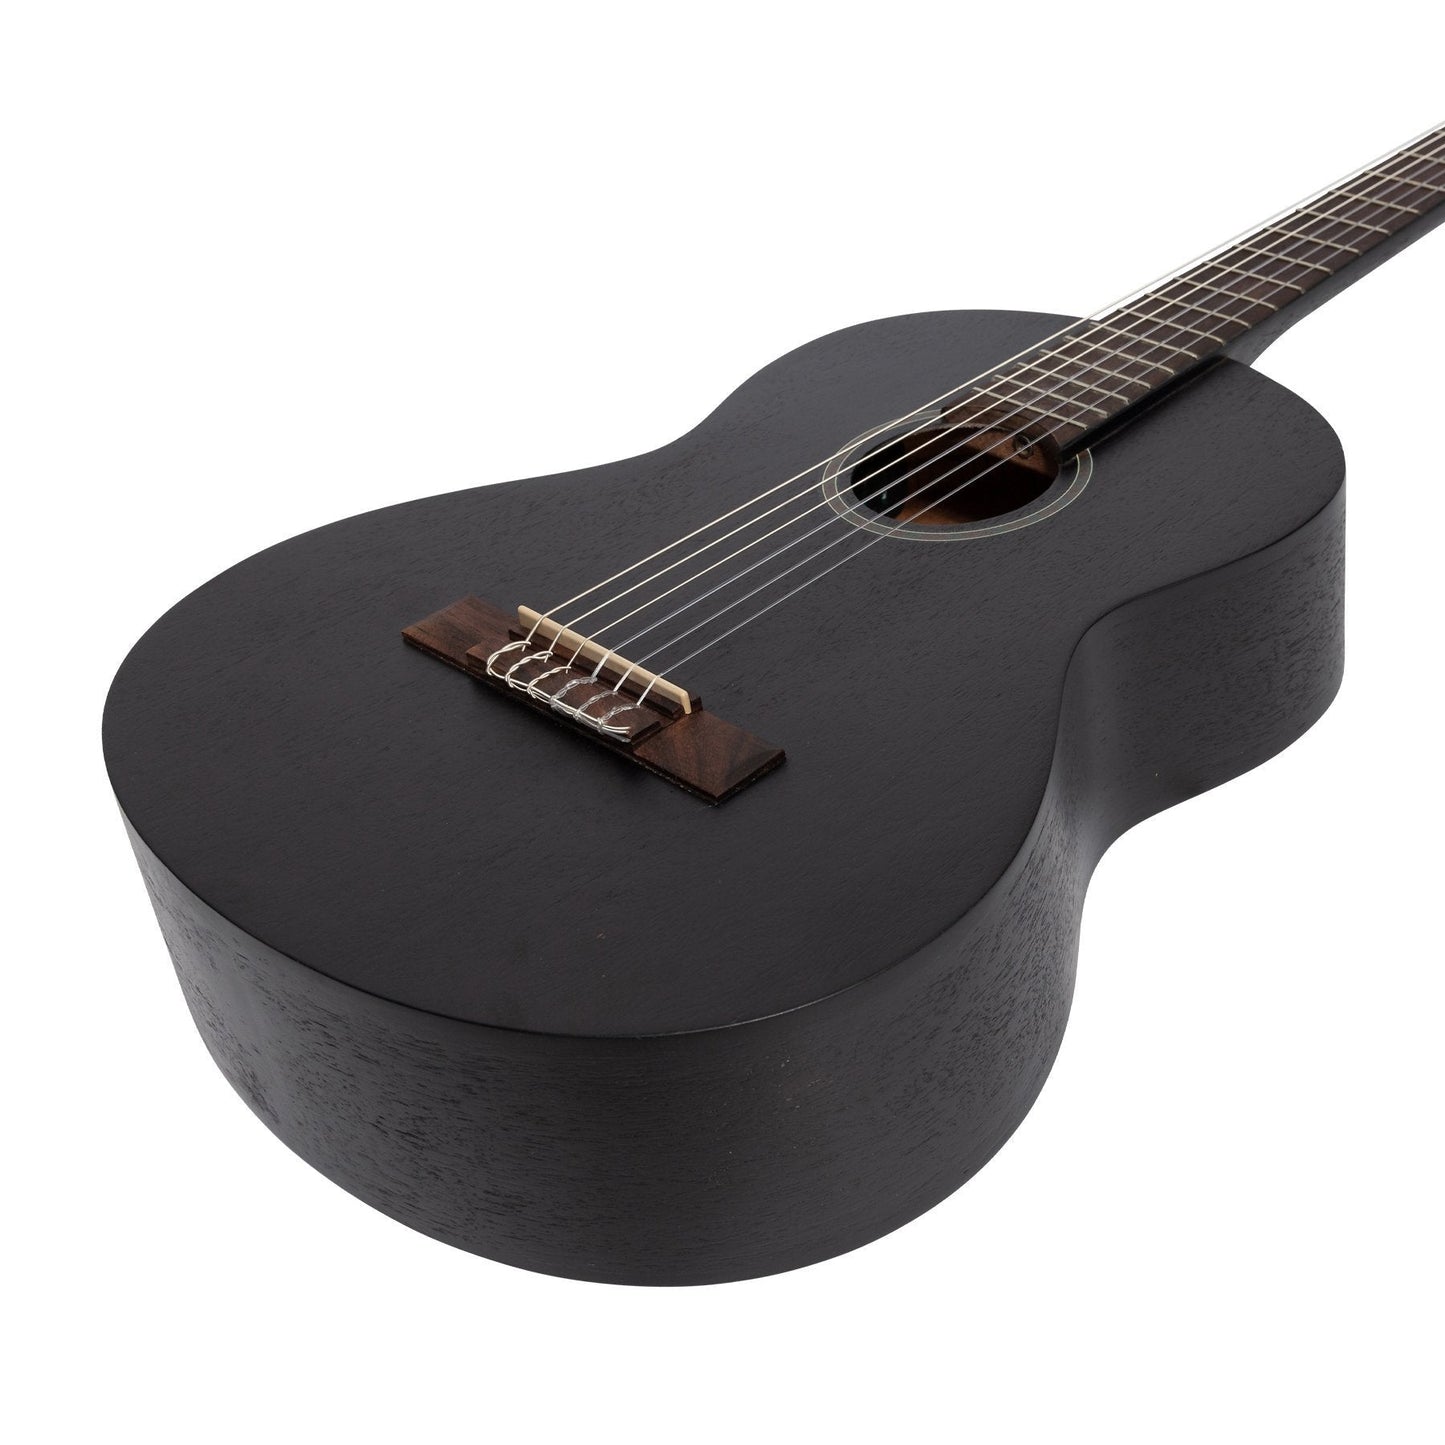 Martinez 'Slim Jim' 3/4 Size Student Classical Guitar with Built In Tuner (Black)